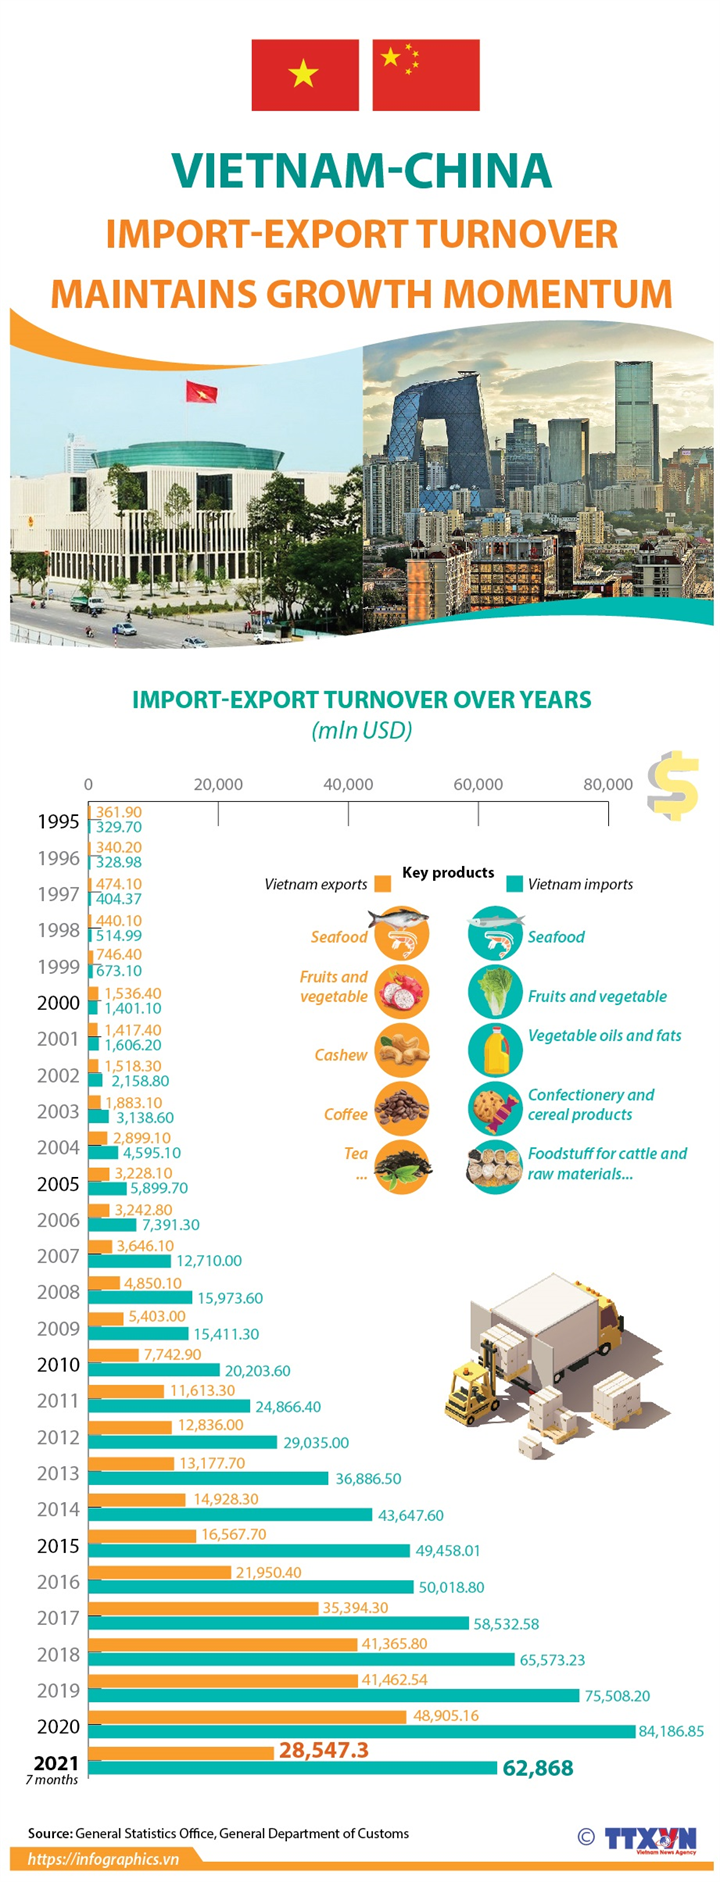 Vietnam-China import-export turnover maintains growth momentum